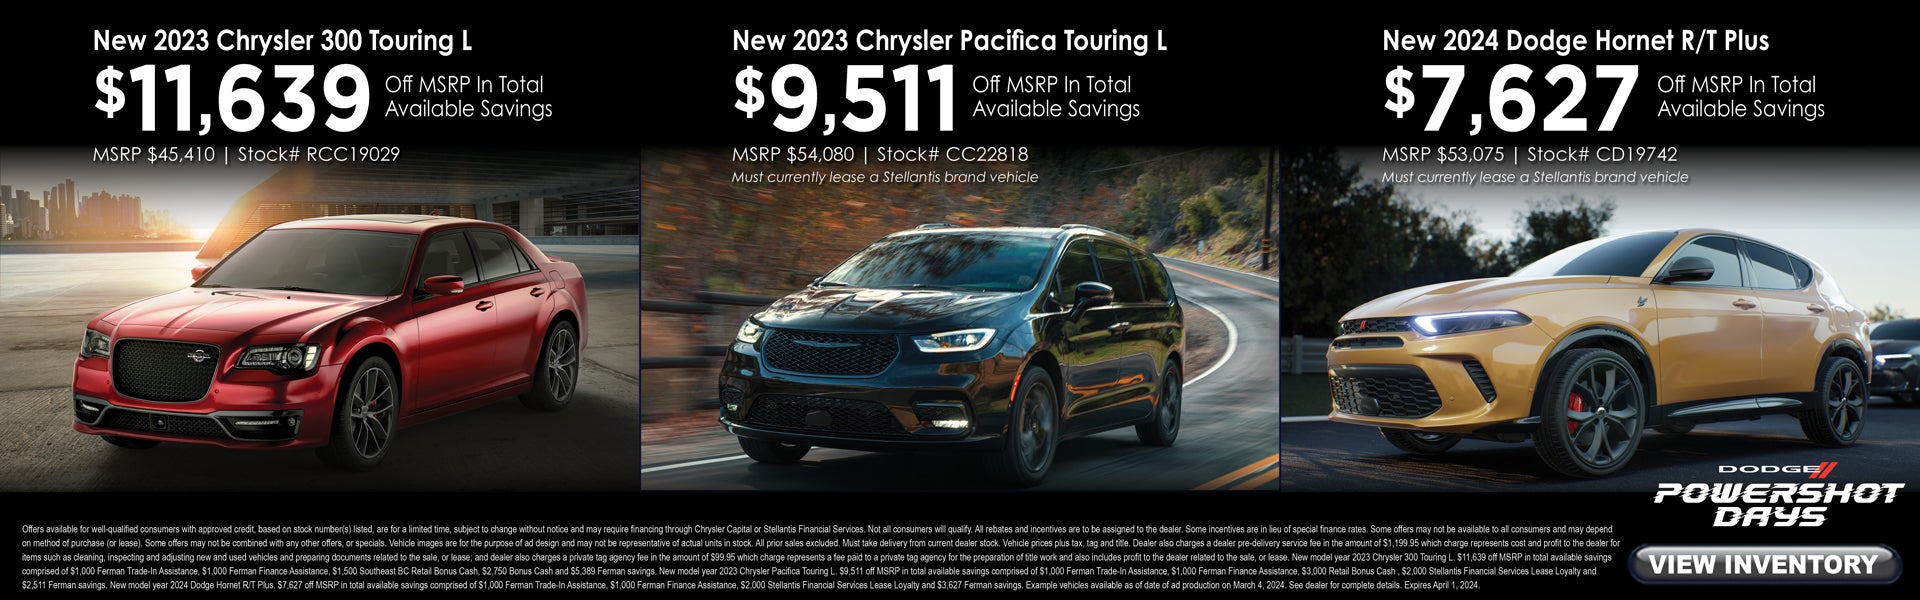 March Savings on New Chrysler 300, Pacifica and Dodge Hornet